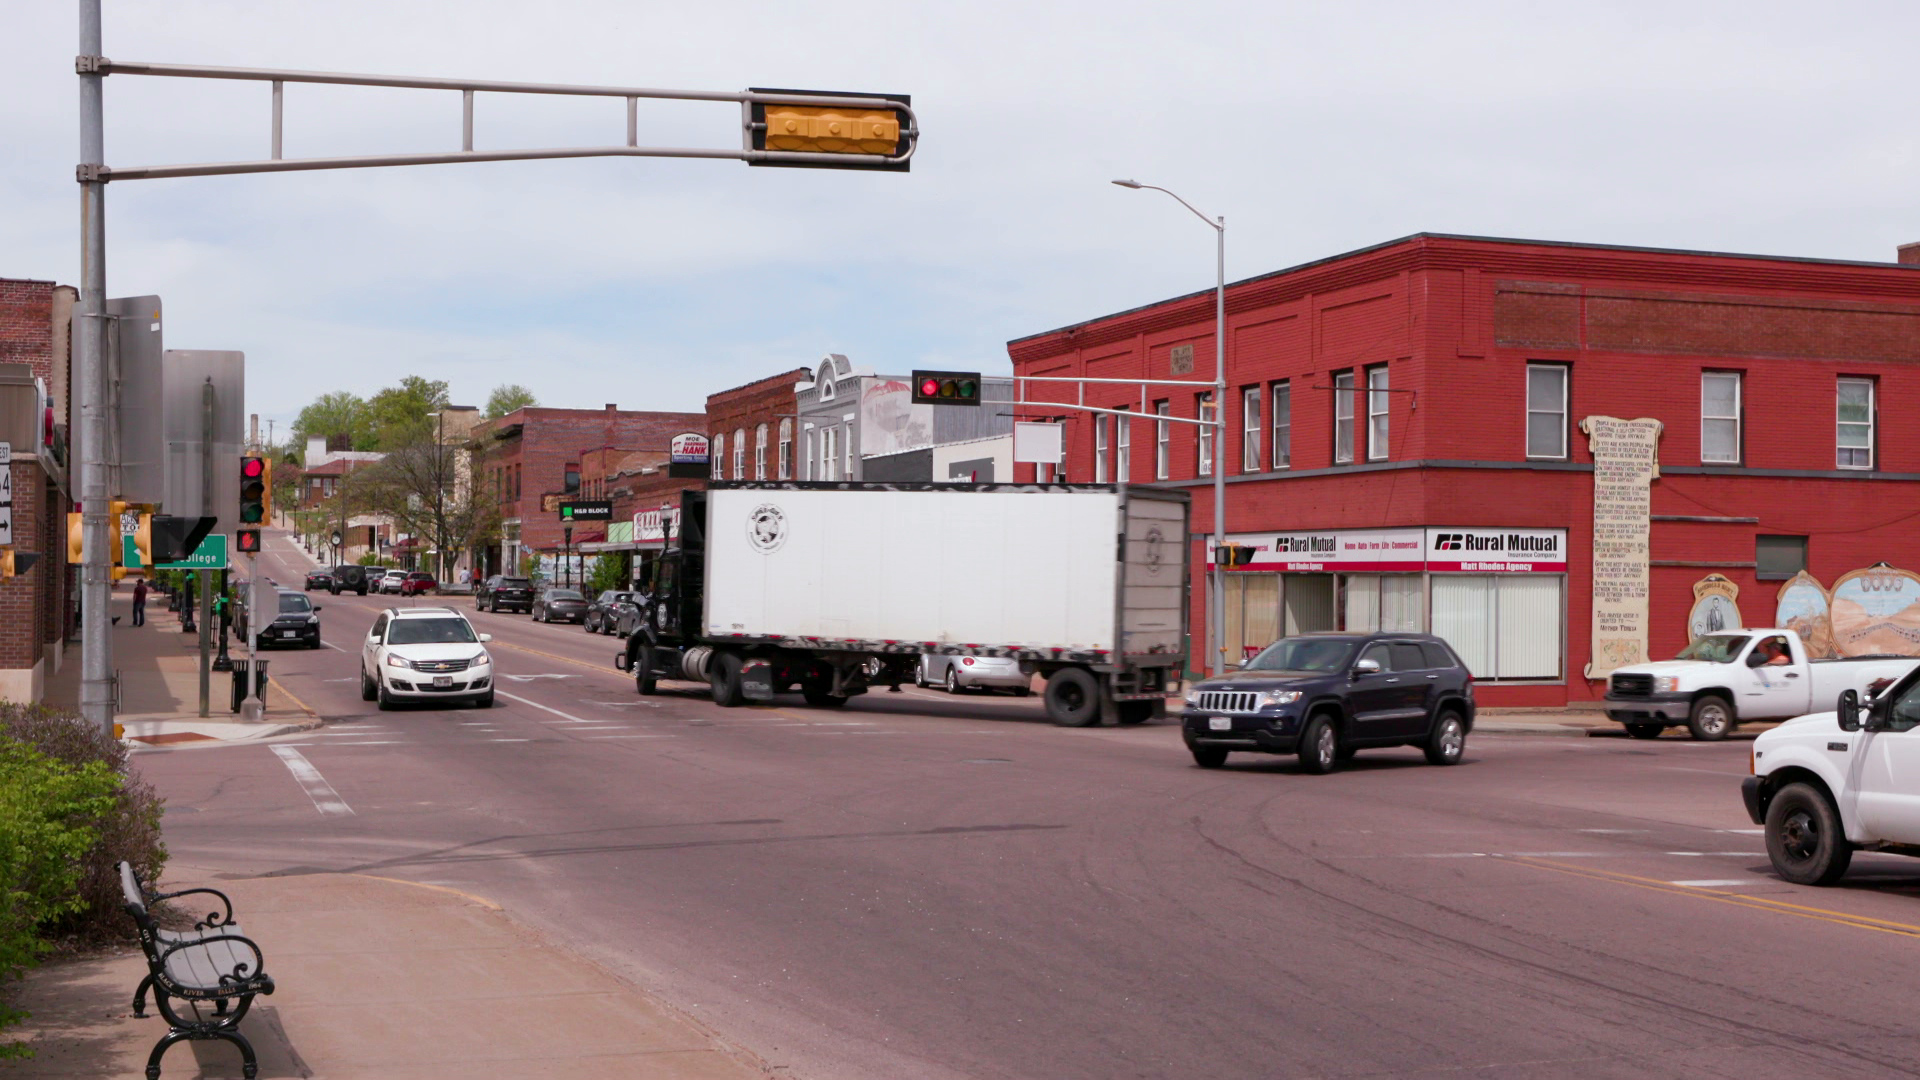 Personal vehicles and a cargo truck pass through an intersection with a stoplight in Black River Falls, surrounded by two-story buildings.